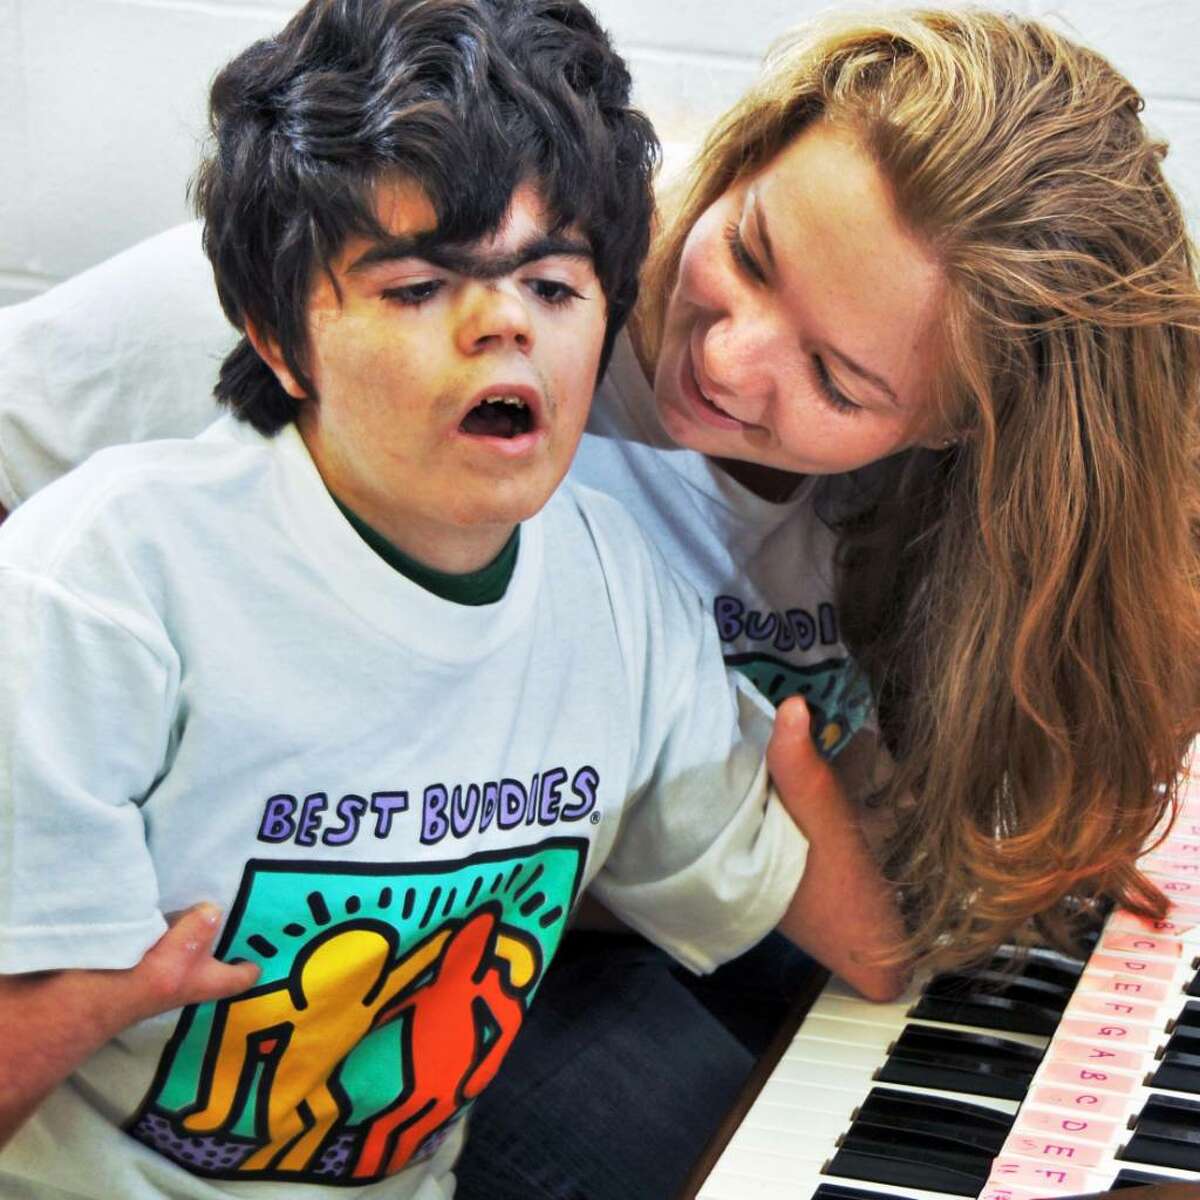 Ballston Spa High School students, senior Ashlie Busone and Best Buddies program student Will Smisloff, share a keyboard in a music room at the school Tuesday morning. Local organizers want to expand the number of area chapters. (John Carl D'Annibale / Times Union)